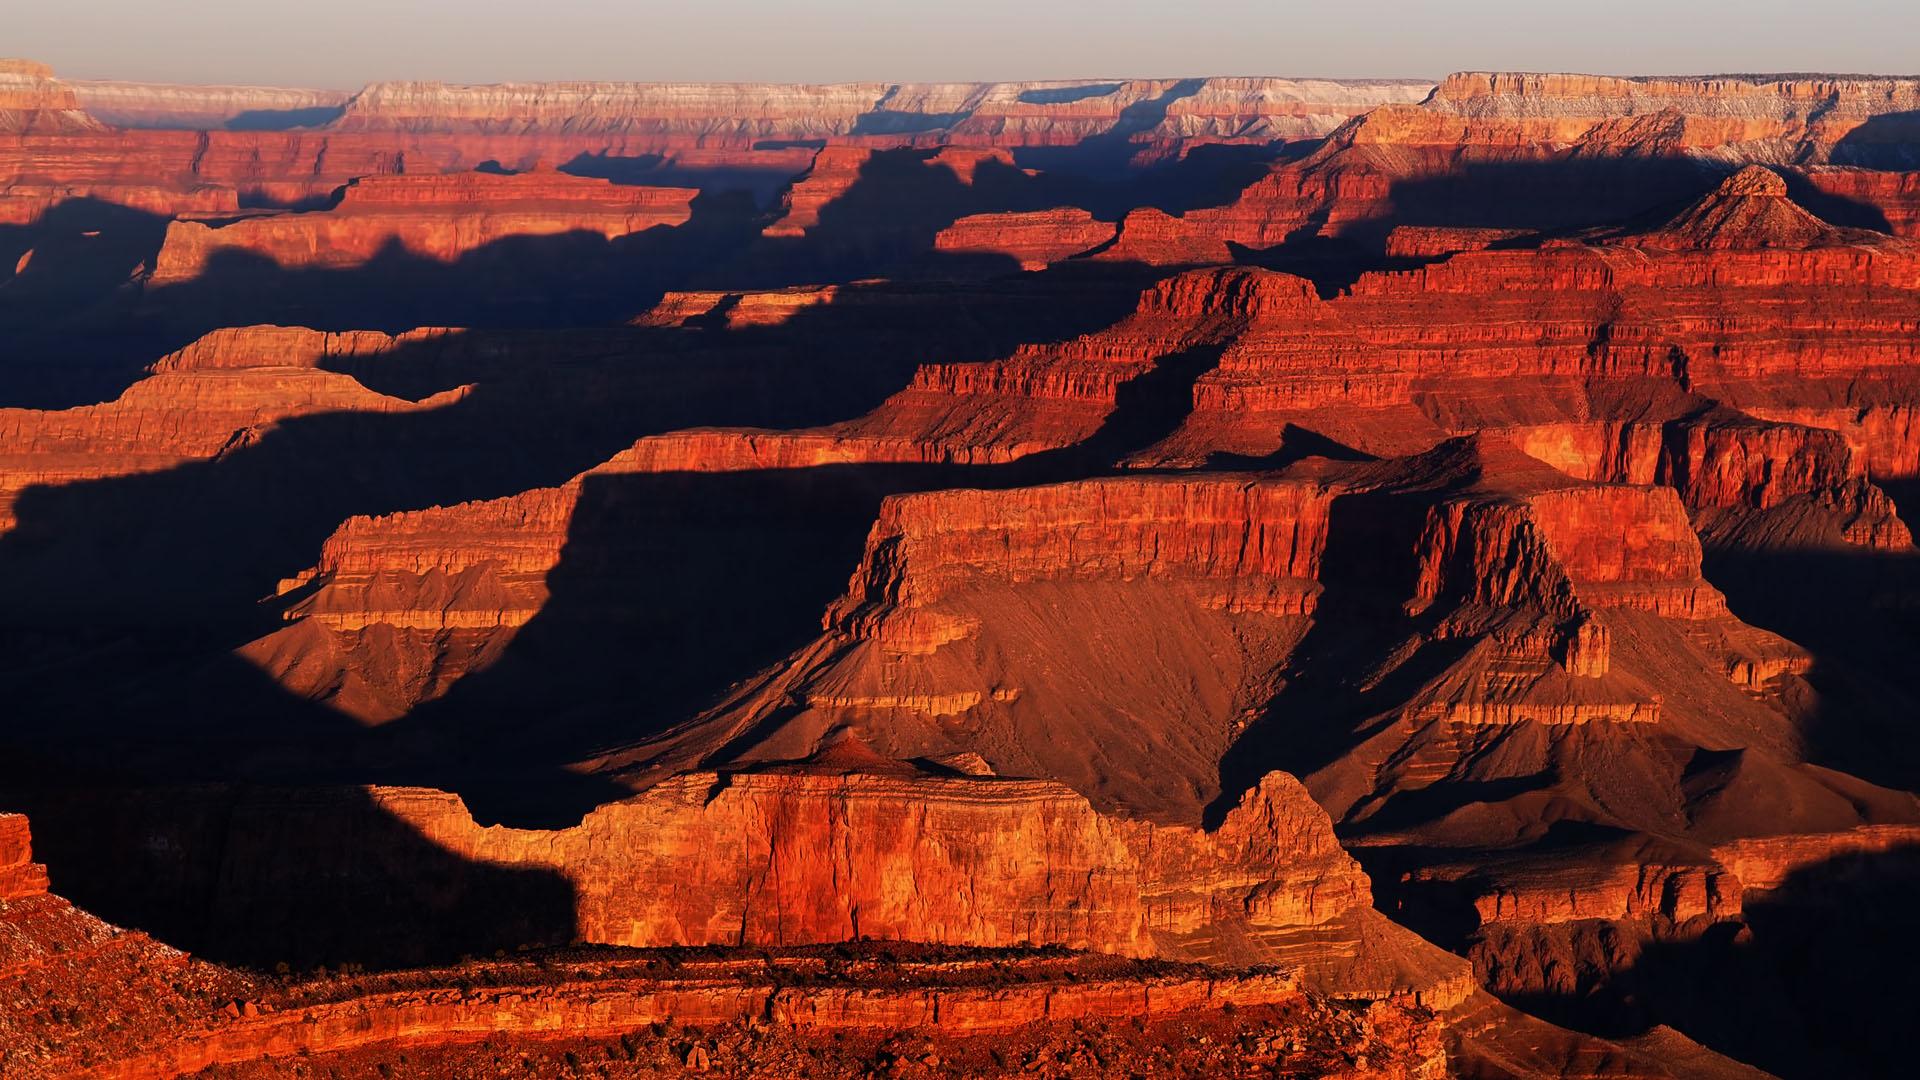 The Grand Canyon HD wallpaper free download